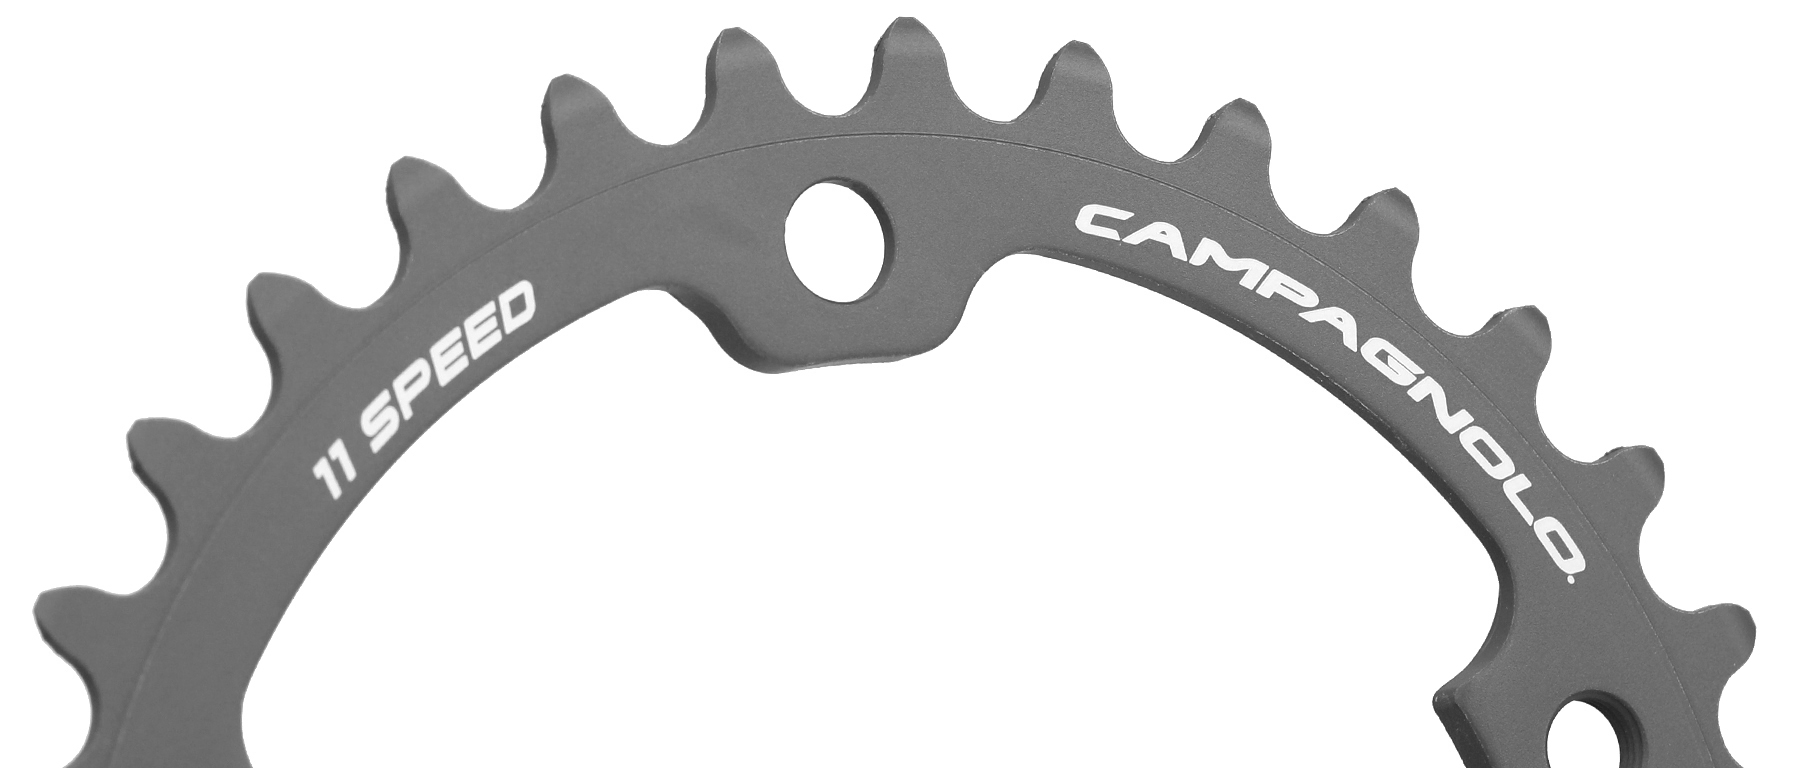 Campagnolo Record 11-Speed Inner Chainring